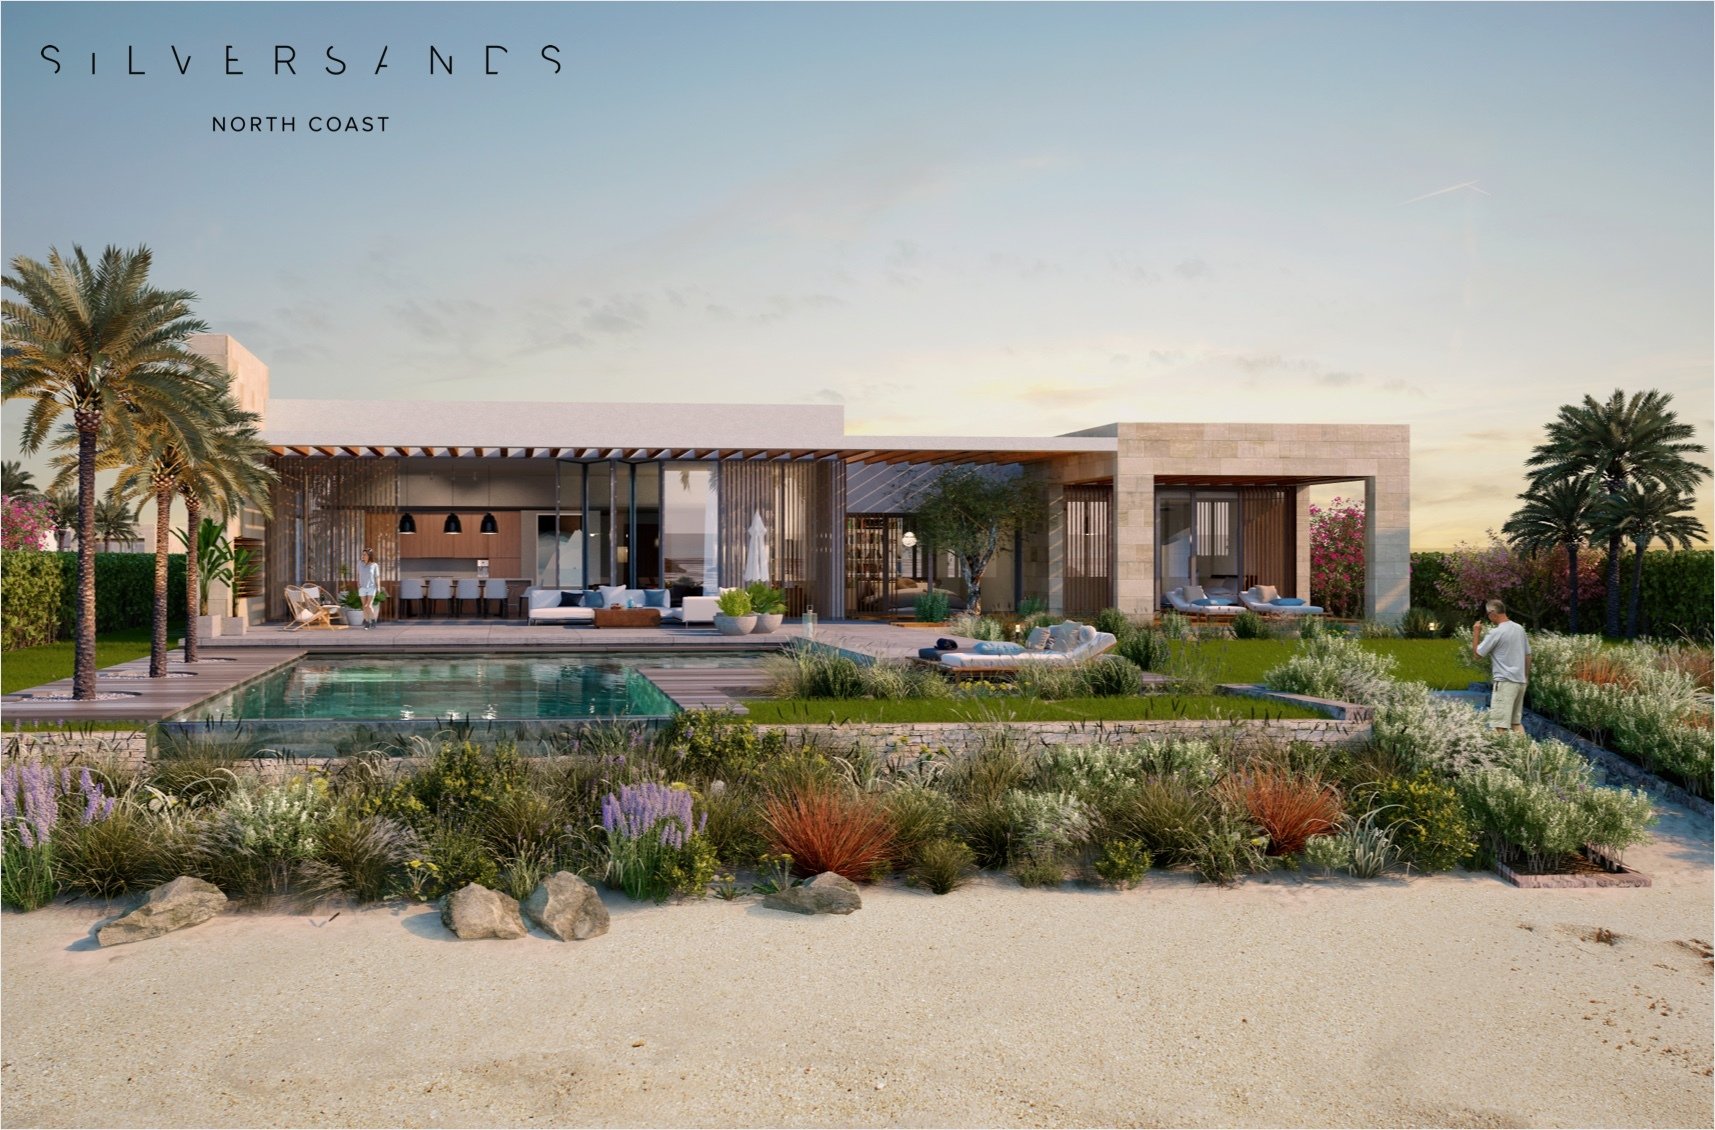 In the North Coast, book a chalet in Silver Sands project with an area of ​​163 meters